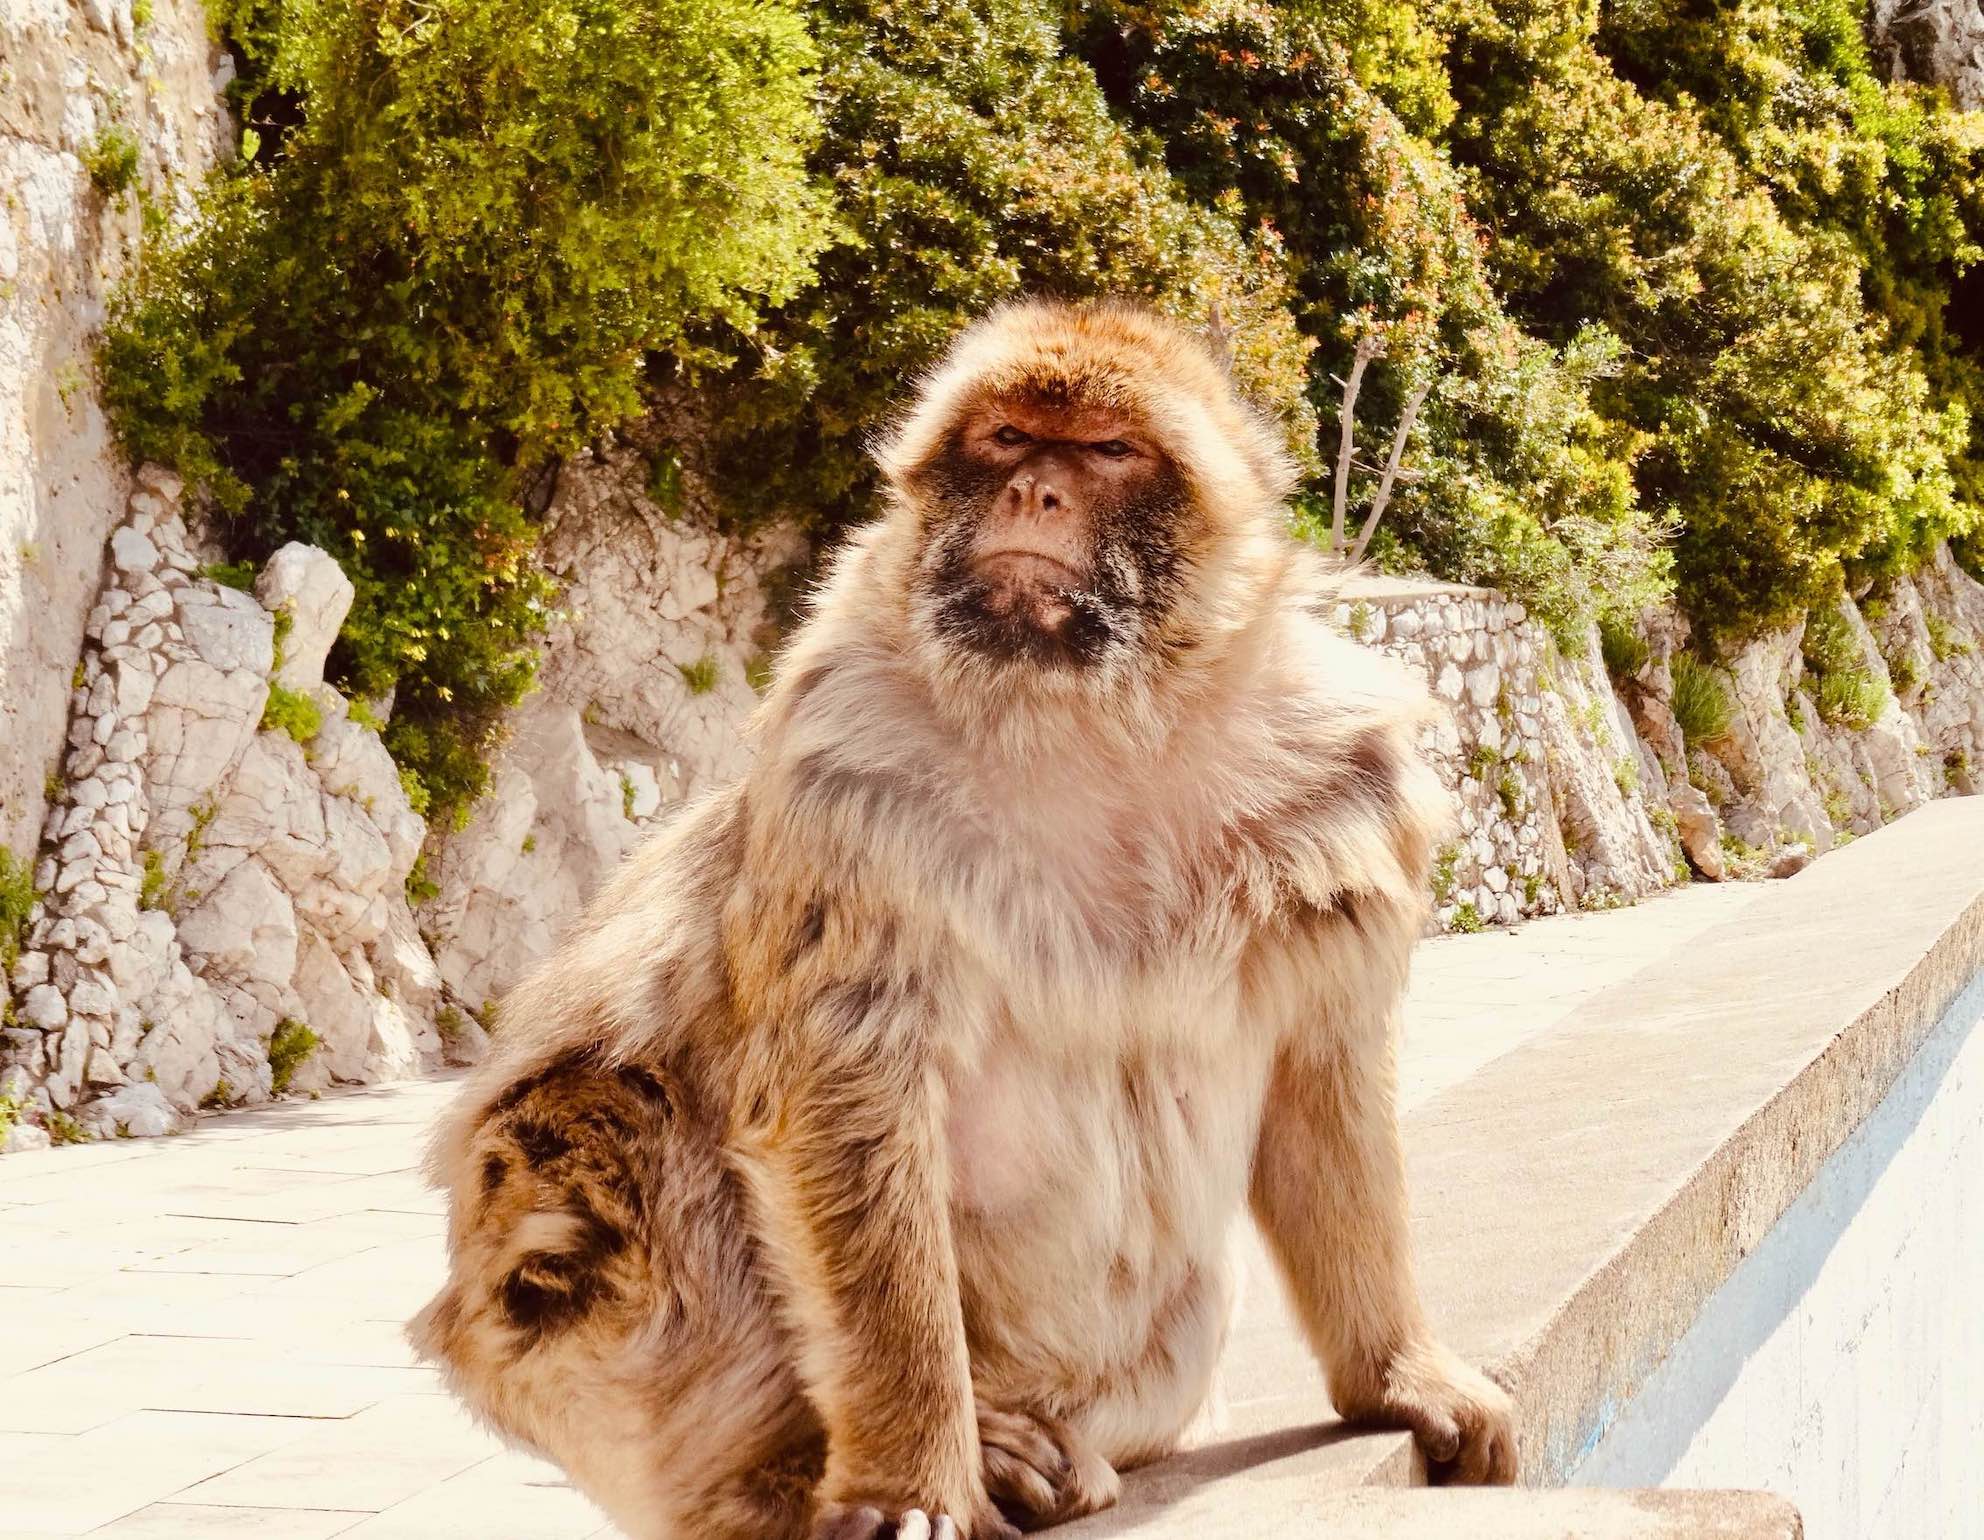 A Barbary macaque in Gibraltar Nature Reserve